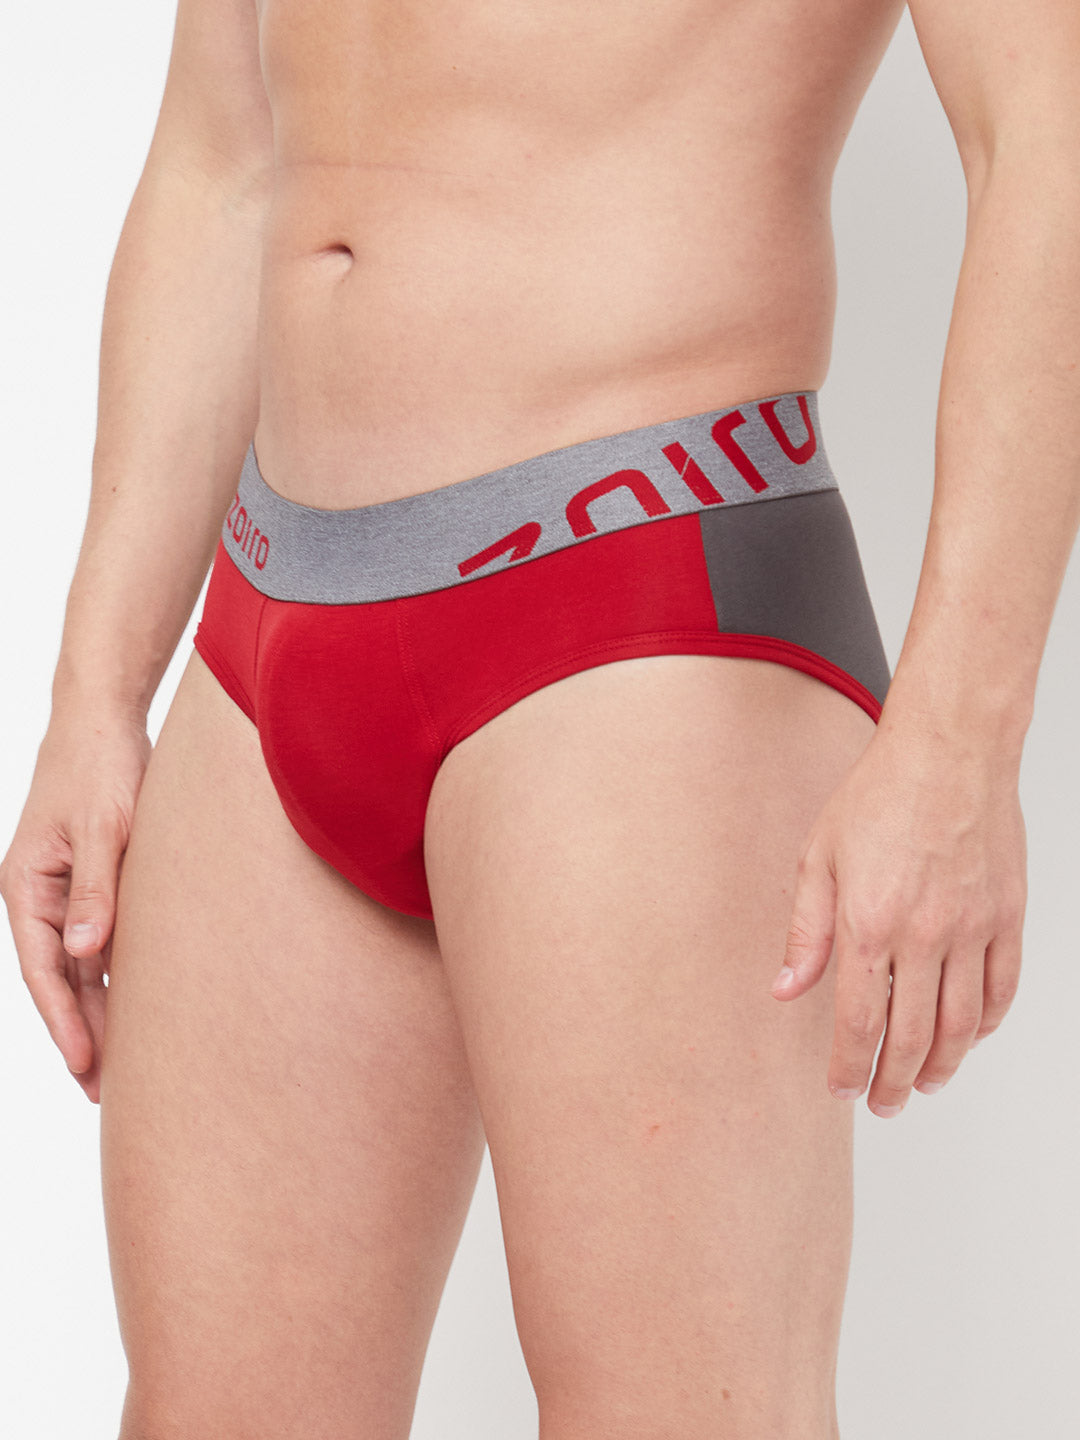 Zoiro Men&#39;s Cotton Brief (Pack Of 2) - Ribon Red /Catstle Rock + Red